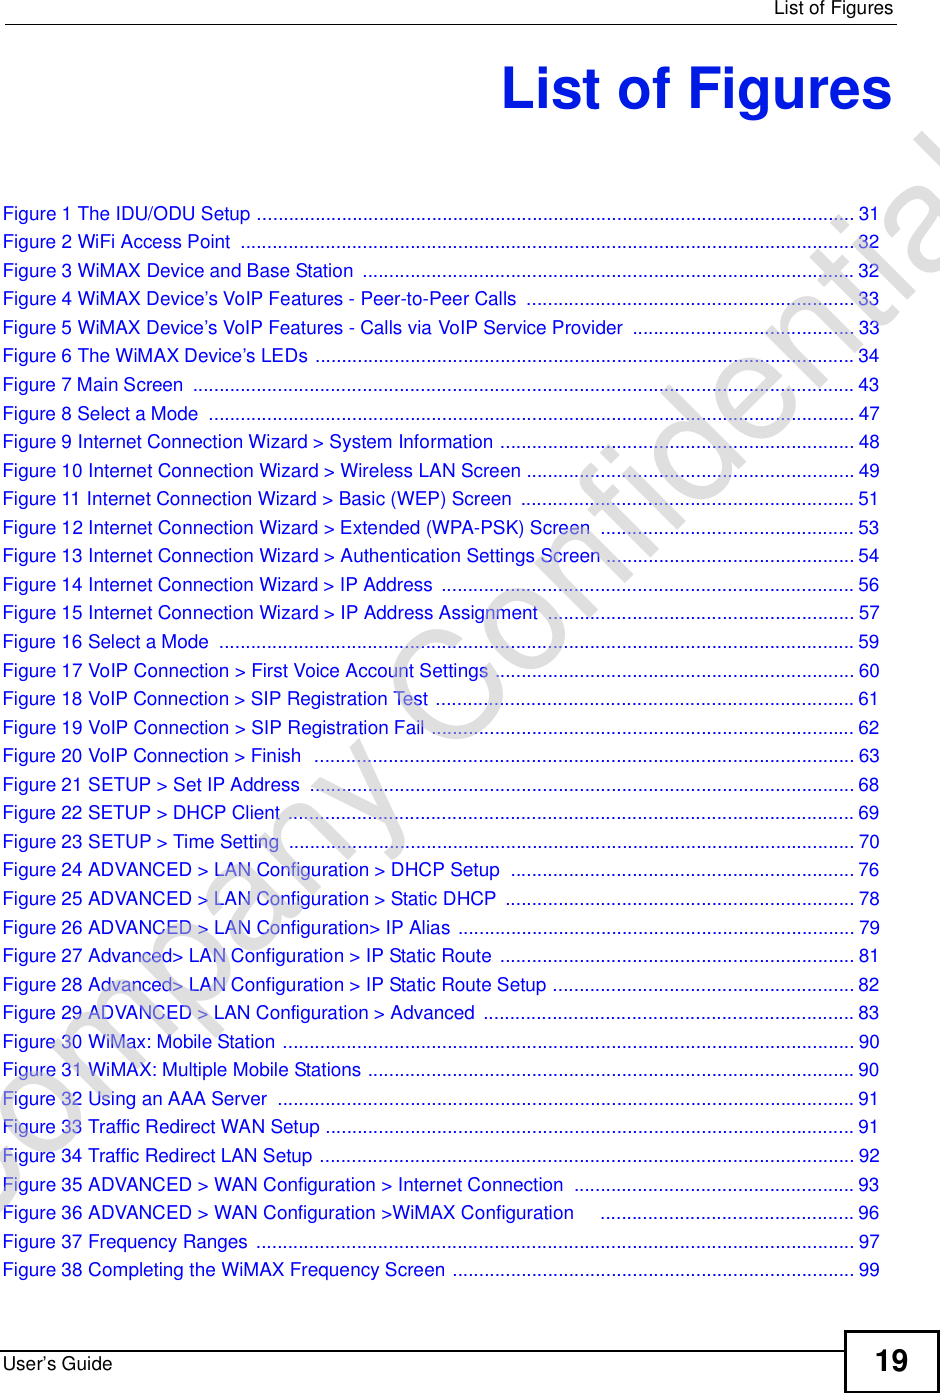  List of FiguresUser’s Guide 19List of FiguresFigure 1 The IDU/ODU Setup .................................................................................................................31Figure 2 WiFi Access Point ....................................................................................................................32Figure 3 WiMAX Device and Base Station .............................................................................................32Figure 4 WiMAX Device’s VoIP Features - Peer-to-Peer Calls ..............................................................33Figure 5 WiMAX Device’s VoIP Features - Calls via VoIP Service Provider ..........................................33Figure 6 The WiMAX Device’s LEDs ......................................................................................................34Figure 7 Main Screen .............................................................................................................................43Figure 8 Select a Mode ..........................................................................................................................47Figure 9 Internet Connection Wizard &gt; System Information ...................................................................48Figure 10 Internet Connection Wizard &gt; Wireless LAN Screen ..............................................................49Figure 11 Internet Connection Wizard &gt; Basic (WEP) Screen ...............................................................51Figure 12 Internet Connection Wizard &gt; Extended (WPA-PSK) Screen ................................................53Figure 13 Internet Connection Wizard &gt; Authentication Settings Screen ...............................................54Figure 14 Internet Connection Wizard &gt; IP Address ..............................................................................56Figure 15 Internet Connection Wizard &gt; IP Address Assignment ..........................................................57Figure 16 Select a Mode ........................................................................................................................59Figure 17 VoIP Connection &gt; First Voice Account Settings ....................................................................60Figure 18 VoIP Connection &gt; SIP Registration Test ...............................................................................61Figure 19 VoIP Connection &gt; SIP Registration Fail ................................................................................62Figure 20 VoIP Connection &gt; Finish  ......................................................................................................63Figure 21 SETUP &gt; Set IP Address .......................................................................................................68Figure 22 SETUP &gt; DHCP Client ...........................................................................................................69Figure 23 SETUP &gt; Time Setting ...........................................................................................................70Figure 24 ADVANCED &gt; LAN Configuration &gt; DHCP Setup .................................................................76Figure 25 ADVANCED &gt; LAN Configuration &gt; Static DHCP ..................................................................78Figure 26 ADVANCED &gt; LAN Configuration&gt; IP Alias ...........................................................................79Figure 27 Advanced&gt; LAN Configuration &gt; IP Static Route ...................................................................81Figure 28 Advanced&gt; LAN Configuration &gt; IP Static Route Setup .........................................................82Figure 29 ADVANCED &gt; LAN Configuration &gt; Advanced ......................................................................83Figure 30 WiMax: Mobile Station ............................................................................................................90Figure 31 WiMAX: Multiple Mobile Stations ............................................................................................90Figure 32 Using an AAA Server .............................................................................................................91Figure 33 Traffic Redirect WAN Setup ....................................................................................................91Figure 34 Traffic Redirect LAN Setup .....................................................................................................92Figure 35 ADVANCED &gt; WAN Configuration &gt; Internet Connection .....................................................93Figure 36 ADVANCED &gt; WAN Configuration &gt;WiMAX Configuration    ................................................96Figure 37 Frequency Ranges .................................................................................................................97Figure 38 Completing the WiMAX Frequency Screen ............................................................................99Company Confidential